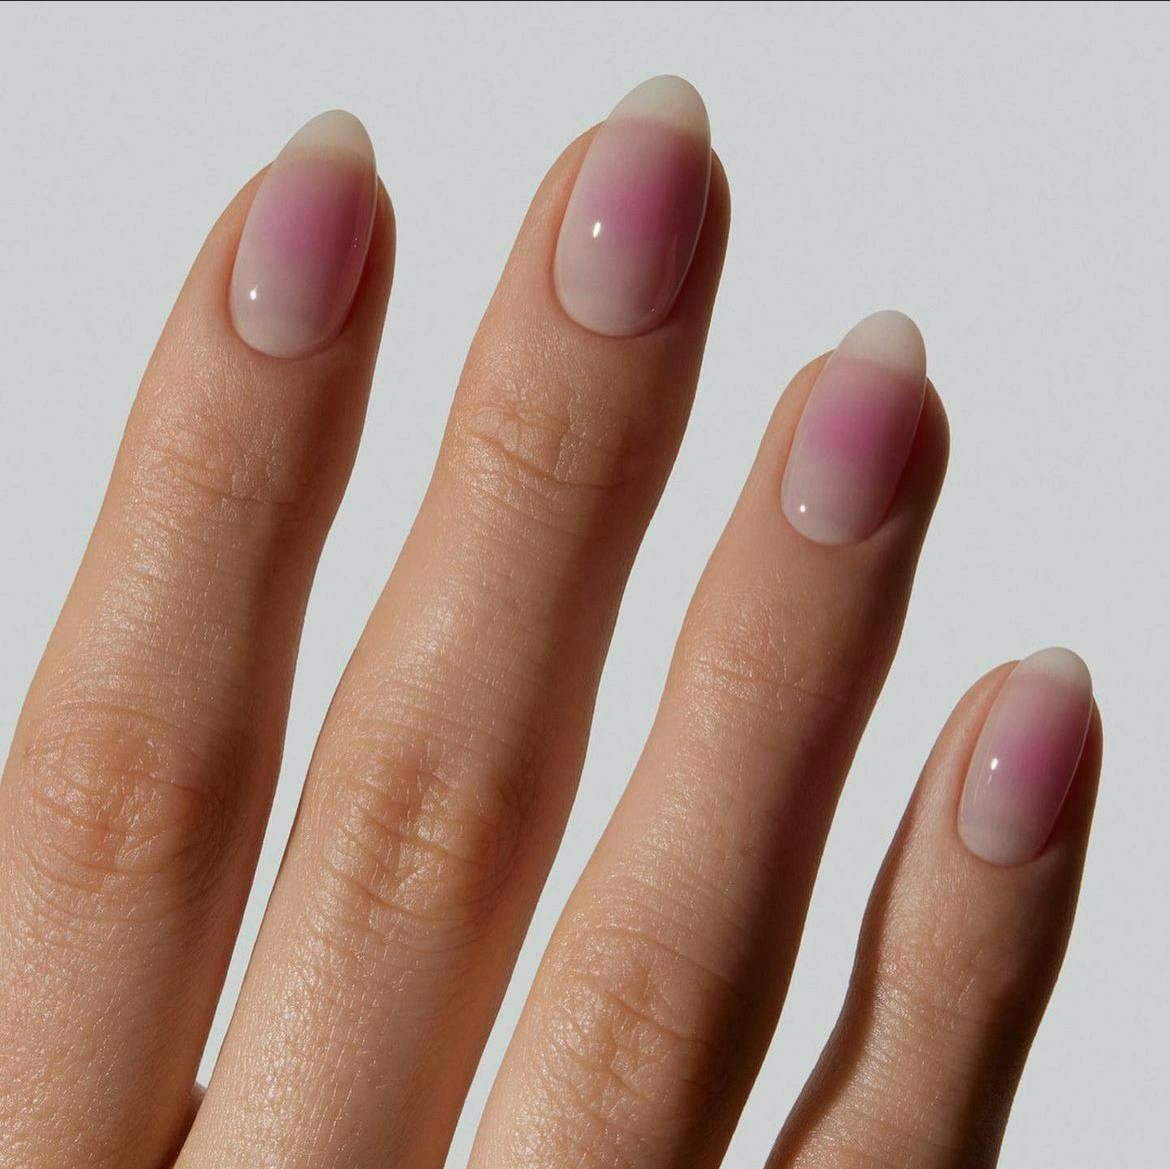 body part finger hand person nail manicure